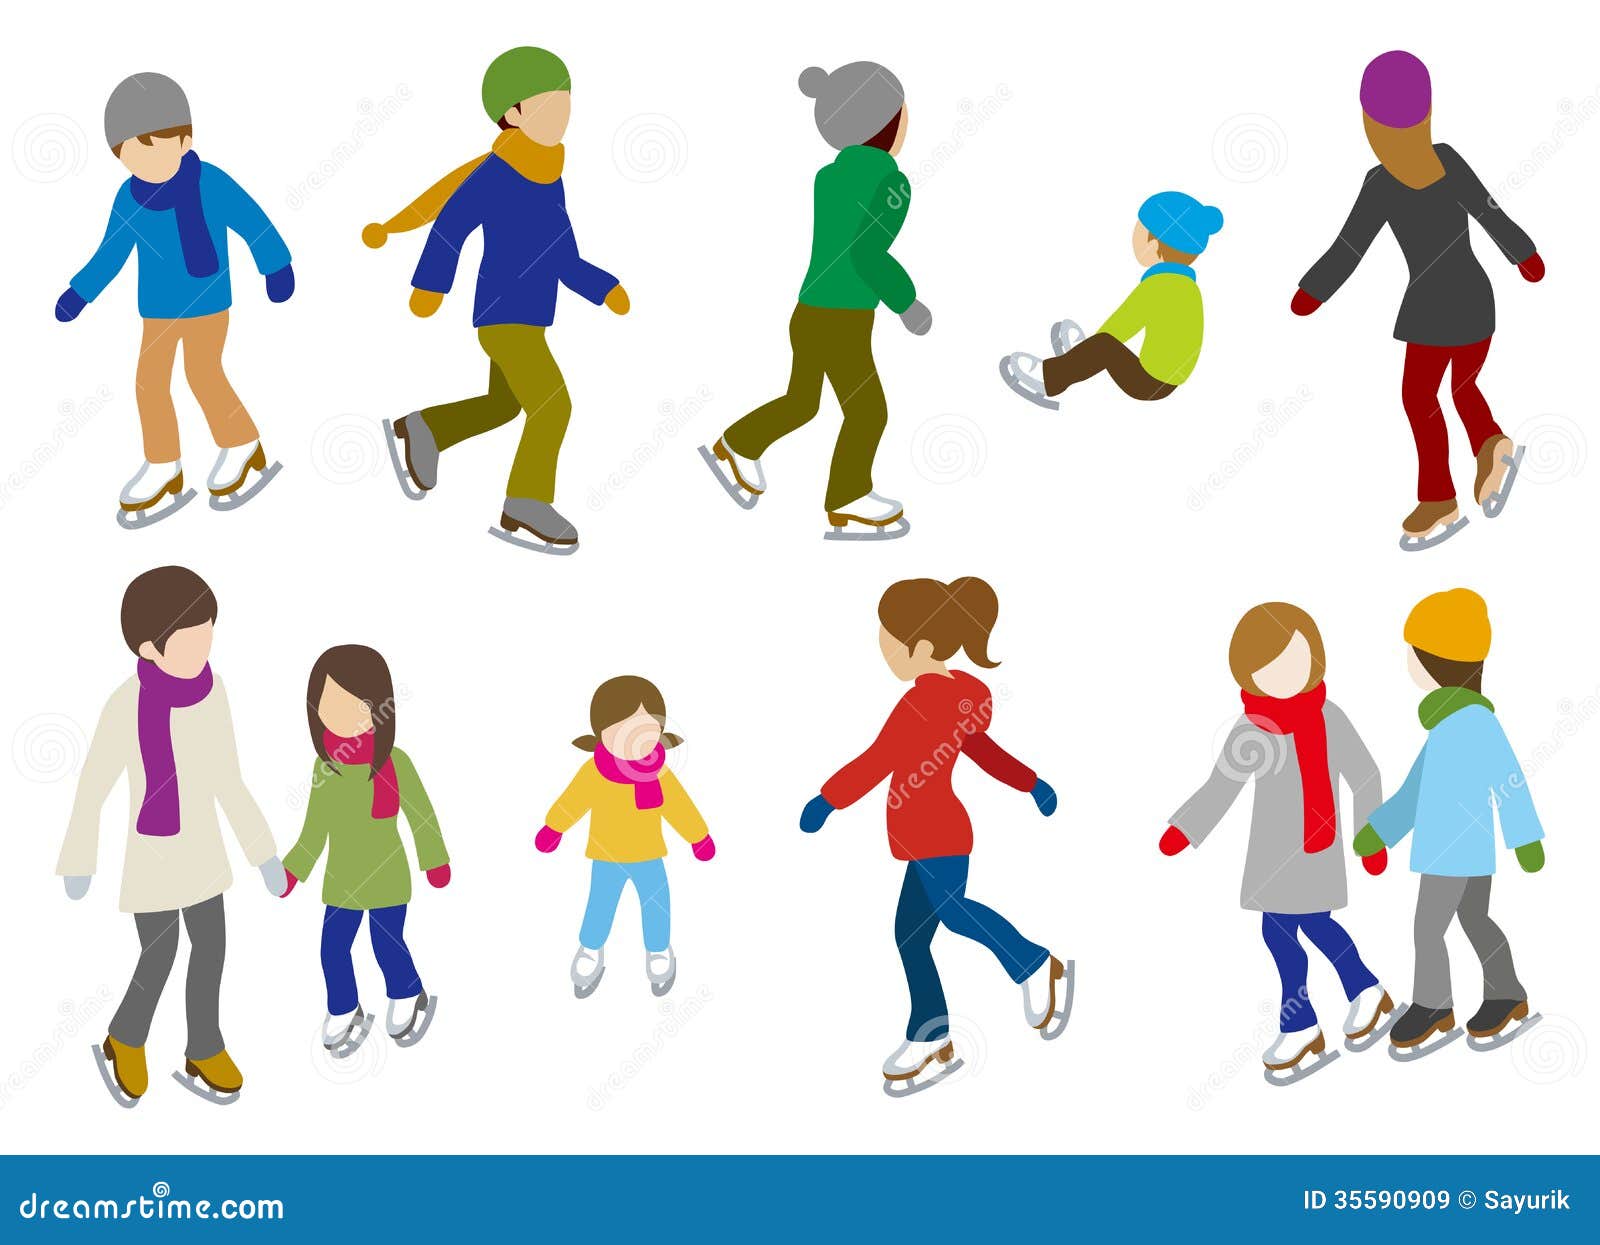 People Ice Skating ,isolated Royalty Free Stock Images - Image: 35590909